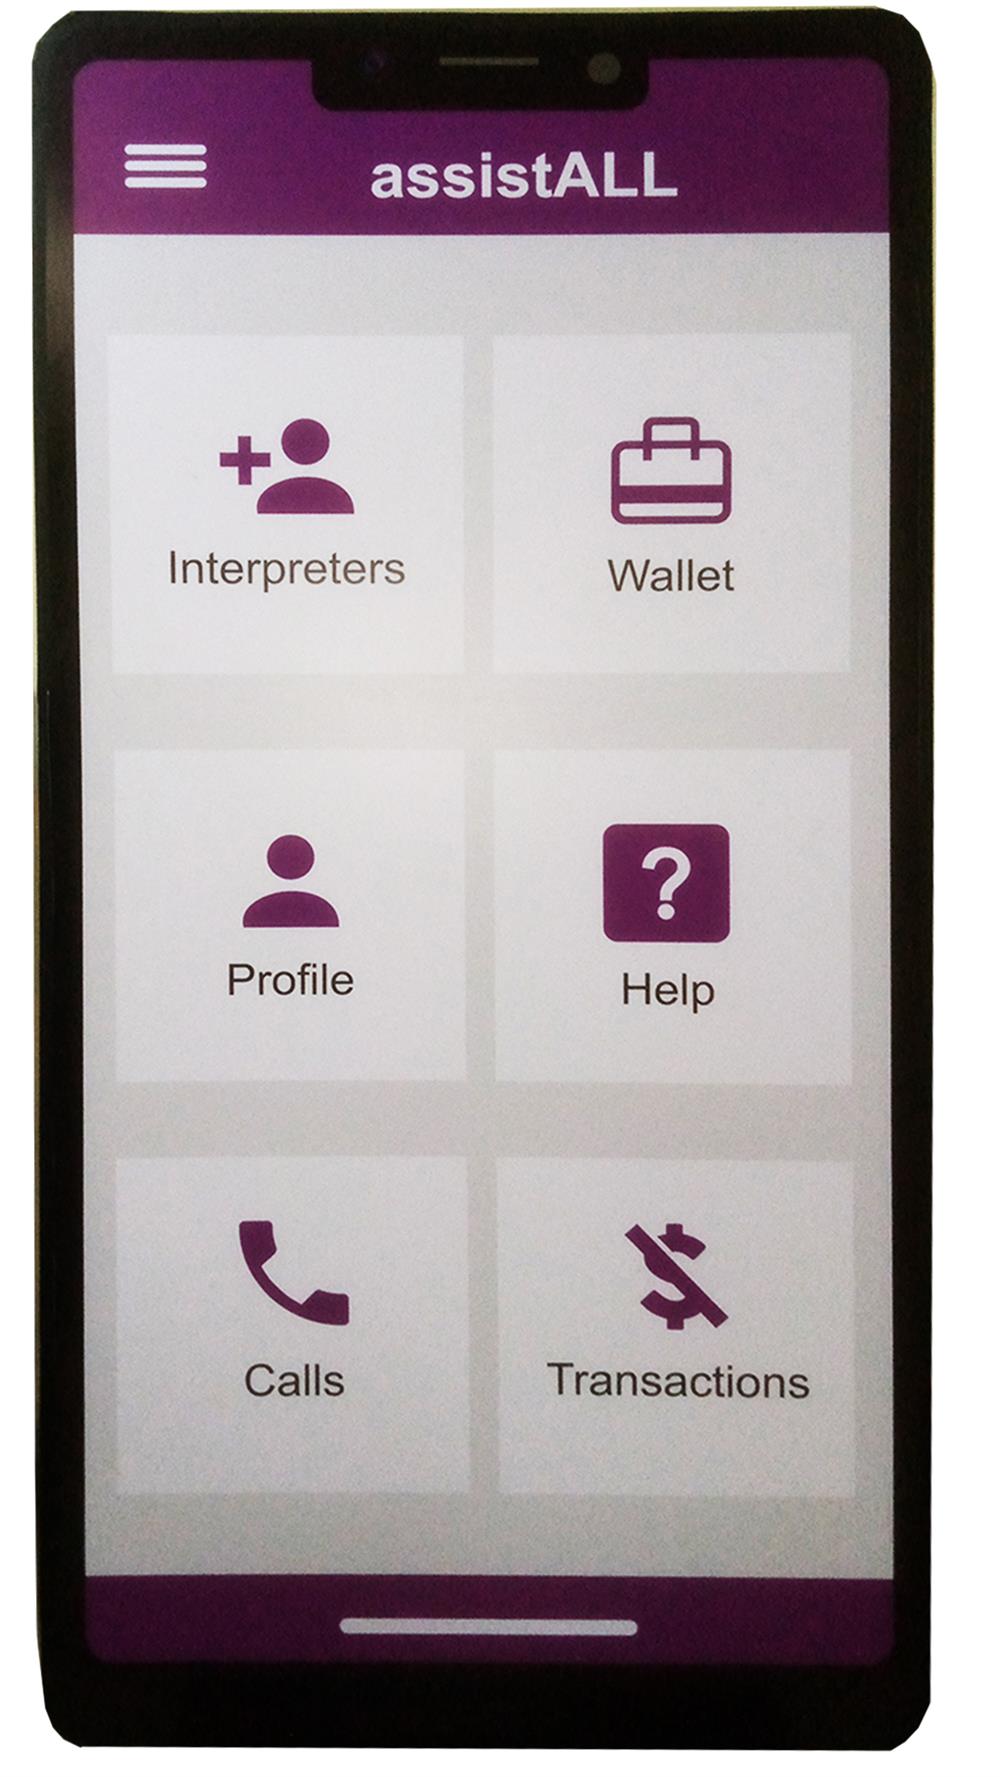 A mobile phone screen showing assistALL app page. The top center of the screen has assistALL logo and on the top left is a three-line icon. Below that are the icons interpreters, wallet, profile, help, calls, transactions